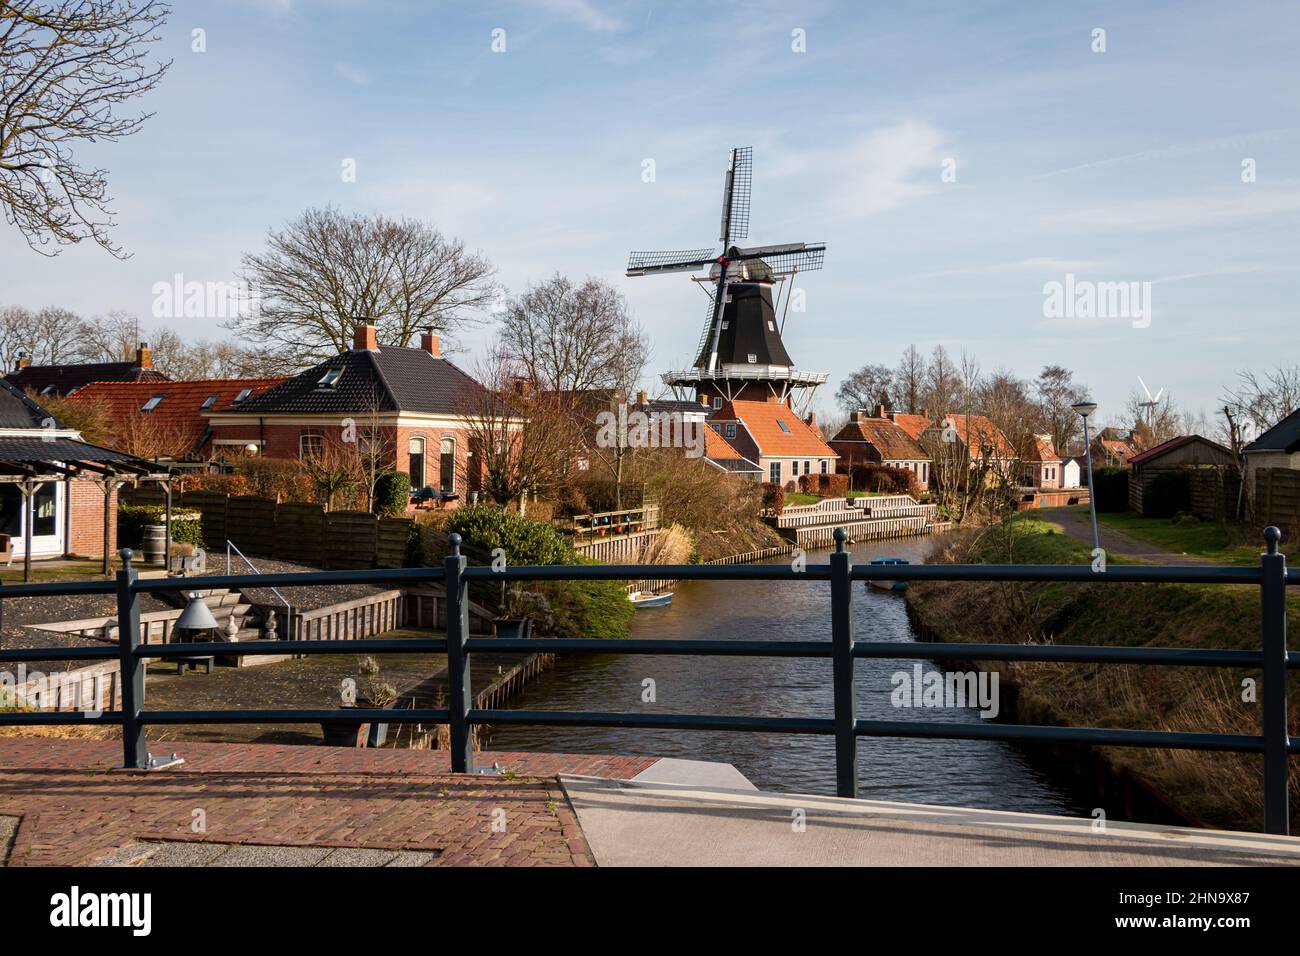 The old mill with the name 'Dutch prosperity' right next to the famous hiking trail with the name 'Pieterpad' in the beautiful village of Mensingeweer Stock Photo